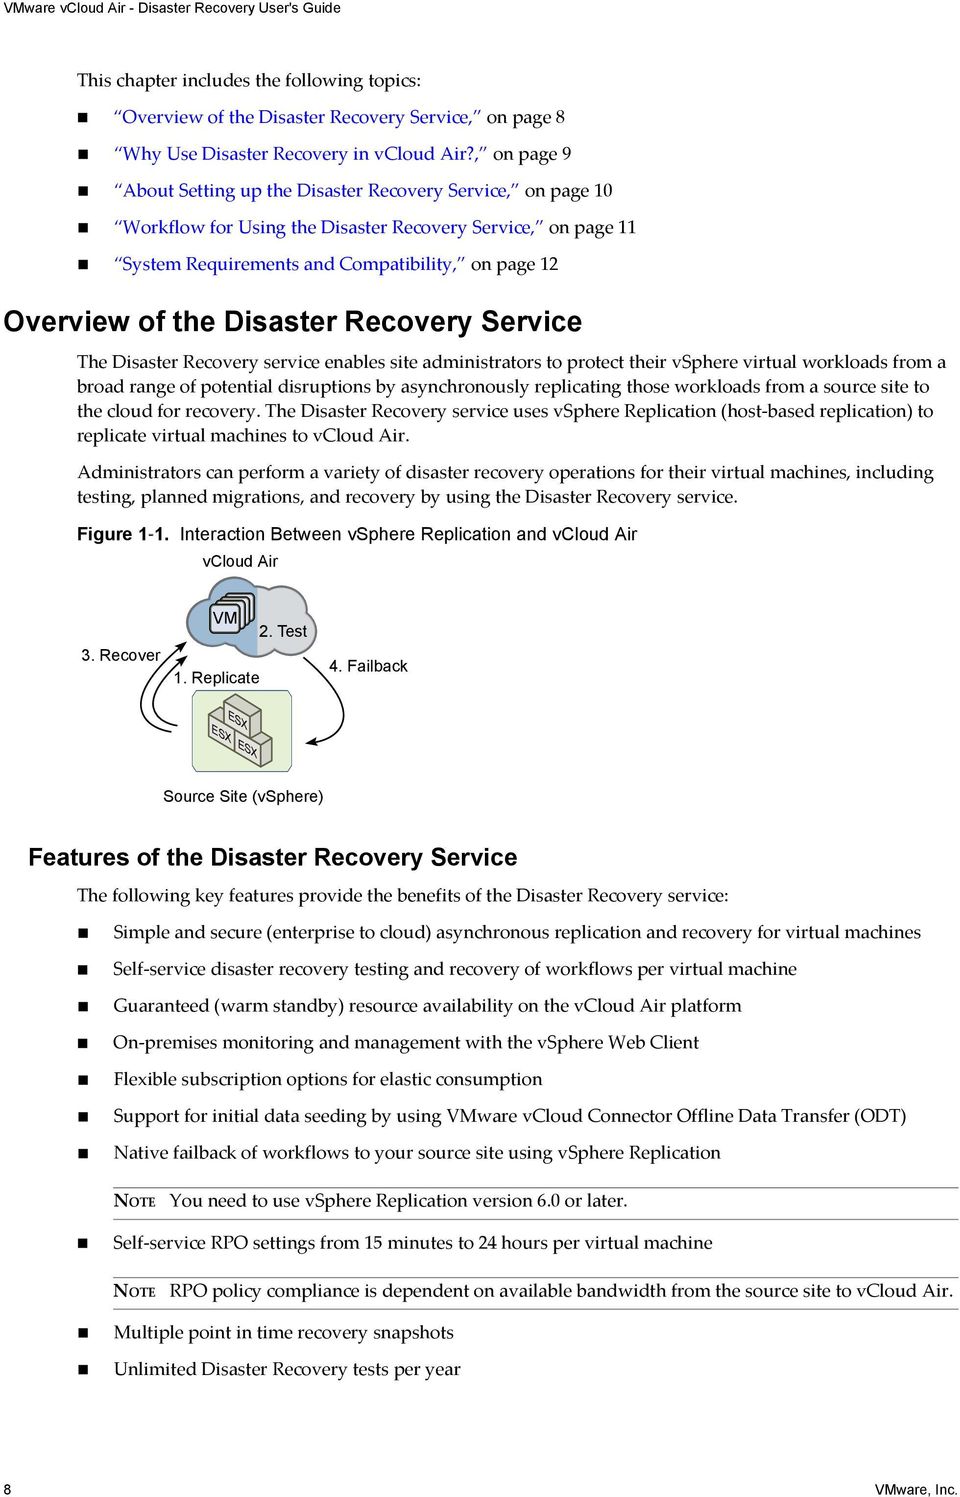 Disaster Recovery Service The Disaster Recovery service enables site administrators to protect their vsphere virtual workloads from a broad range of potential disruptions by asynchronously